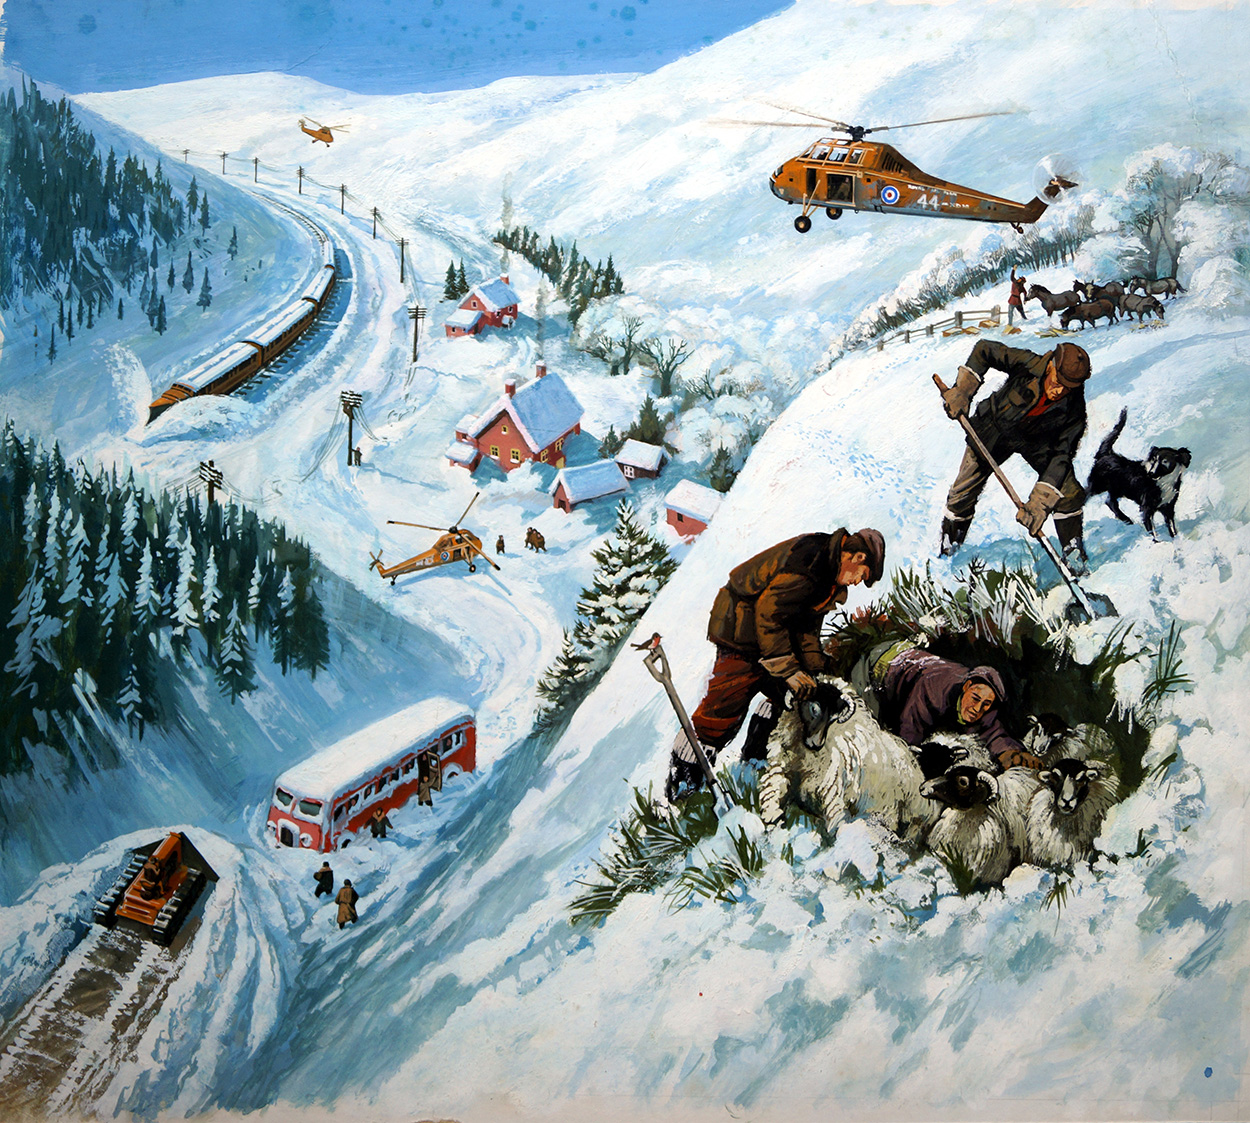 Winter Rescue (Original) art by Transport at The Illustration Art Gallery